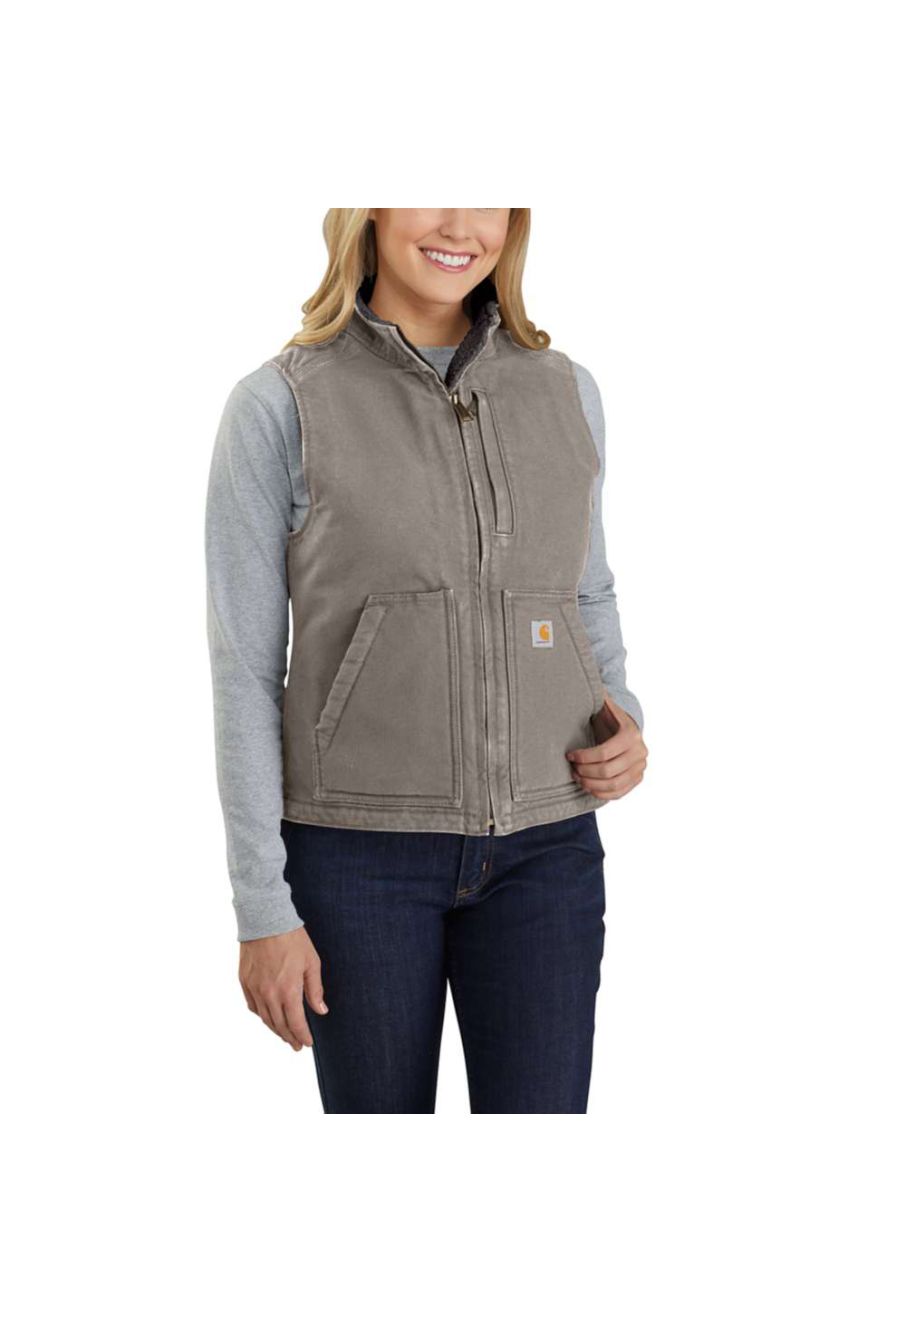 Carhartt Women's Taupe Washed Duck Sherpa-Lined Jacket